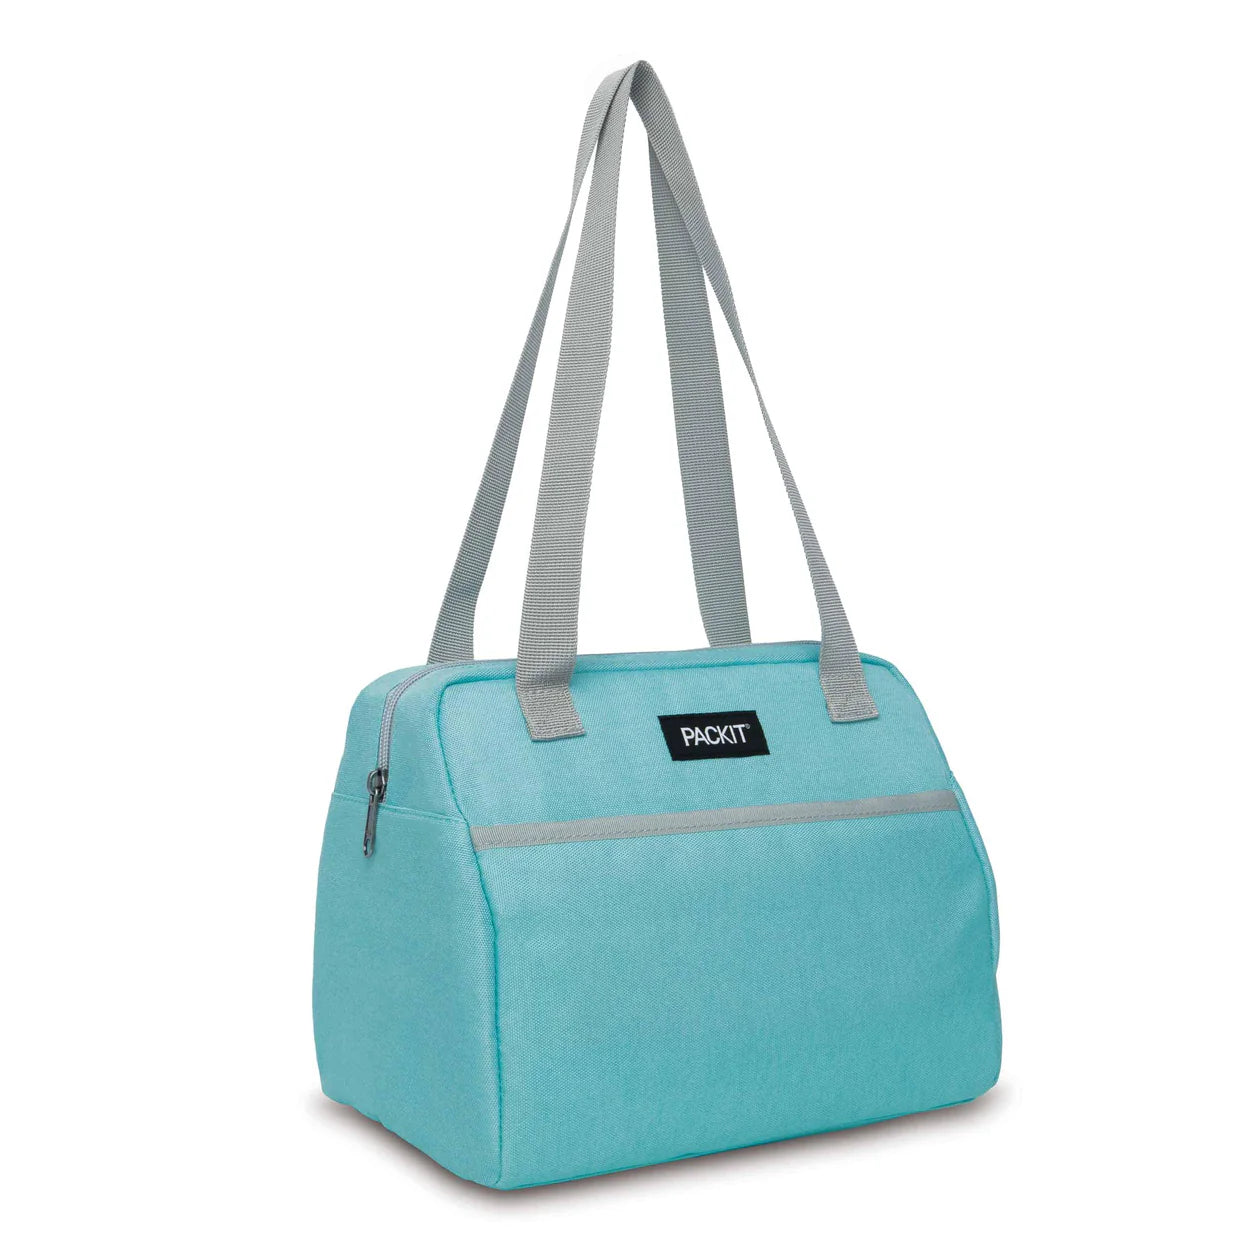 Packit Hampton Tote Bag by ERGO | Available at The Green Collective